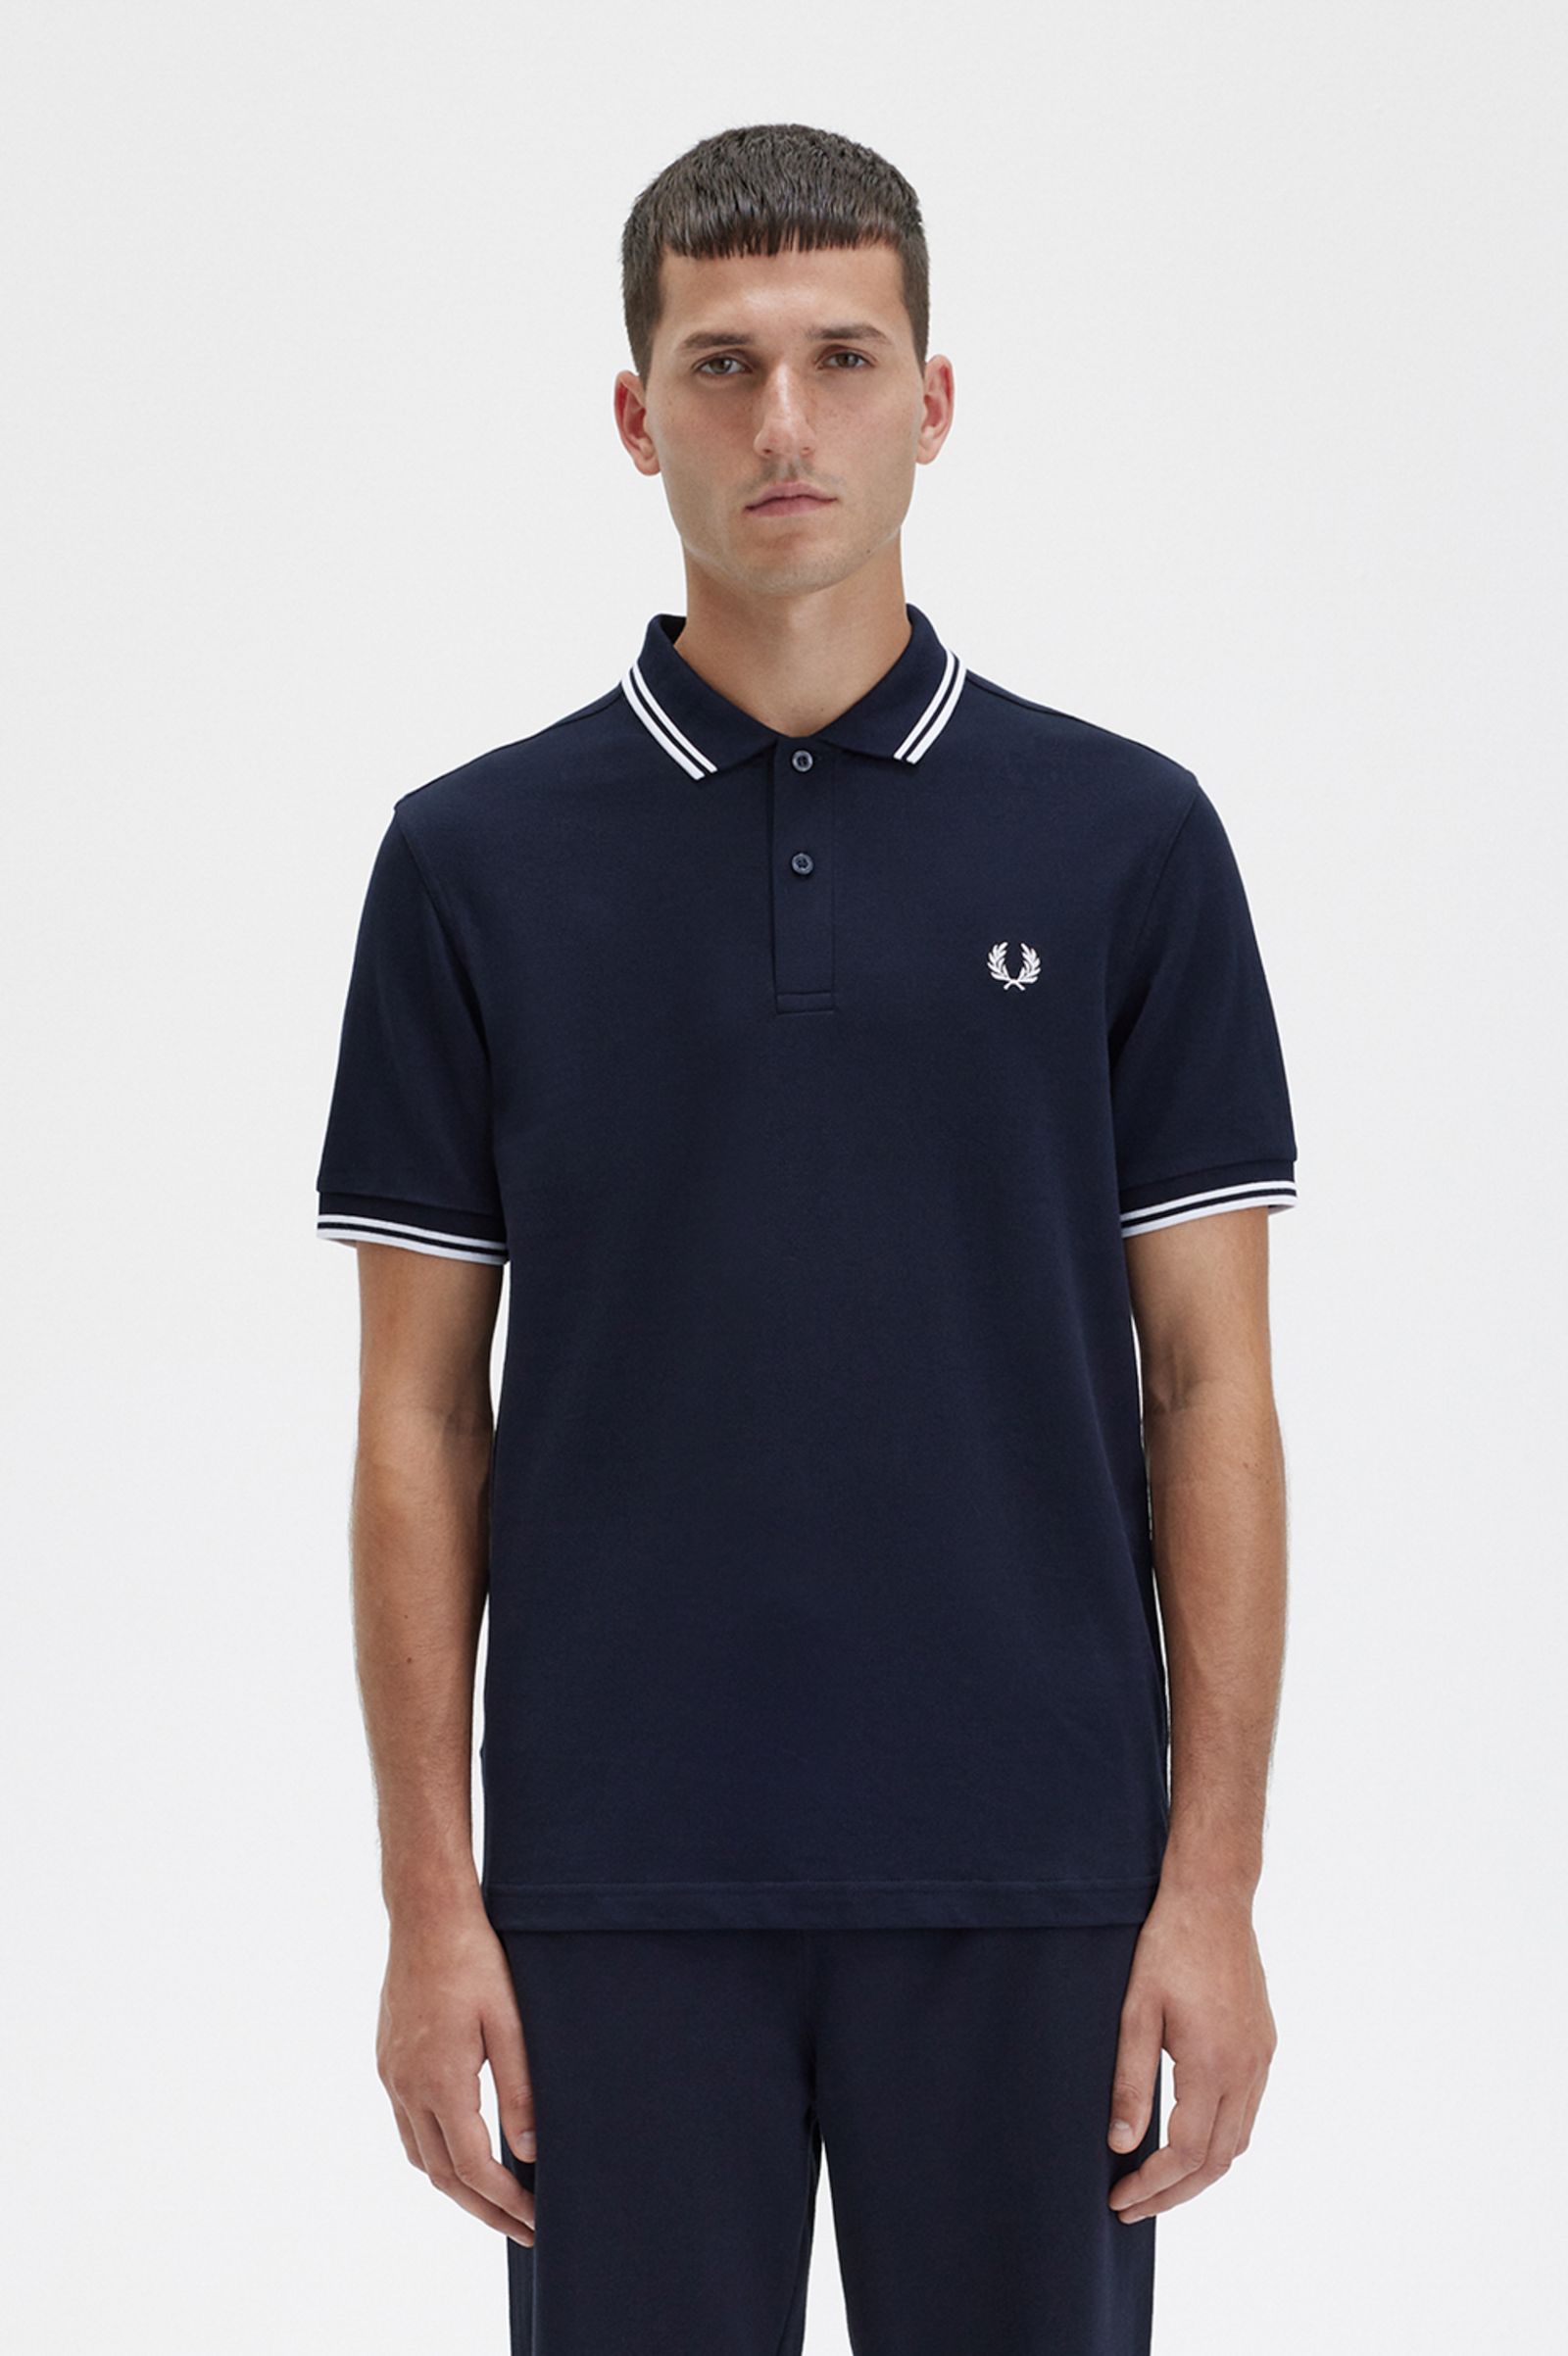 The Fred Perry Shirt - M3600-